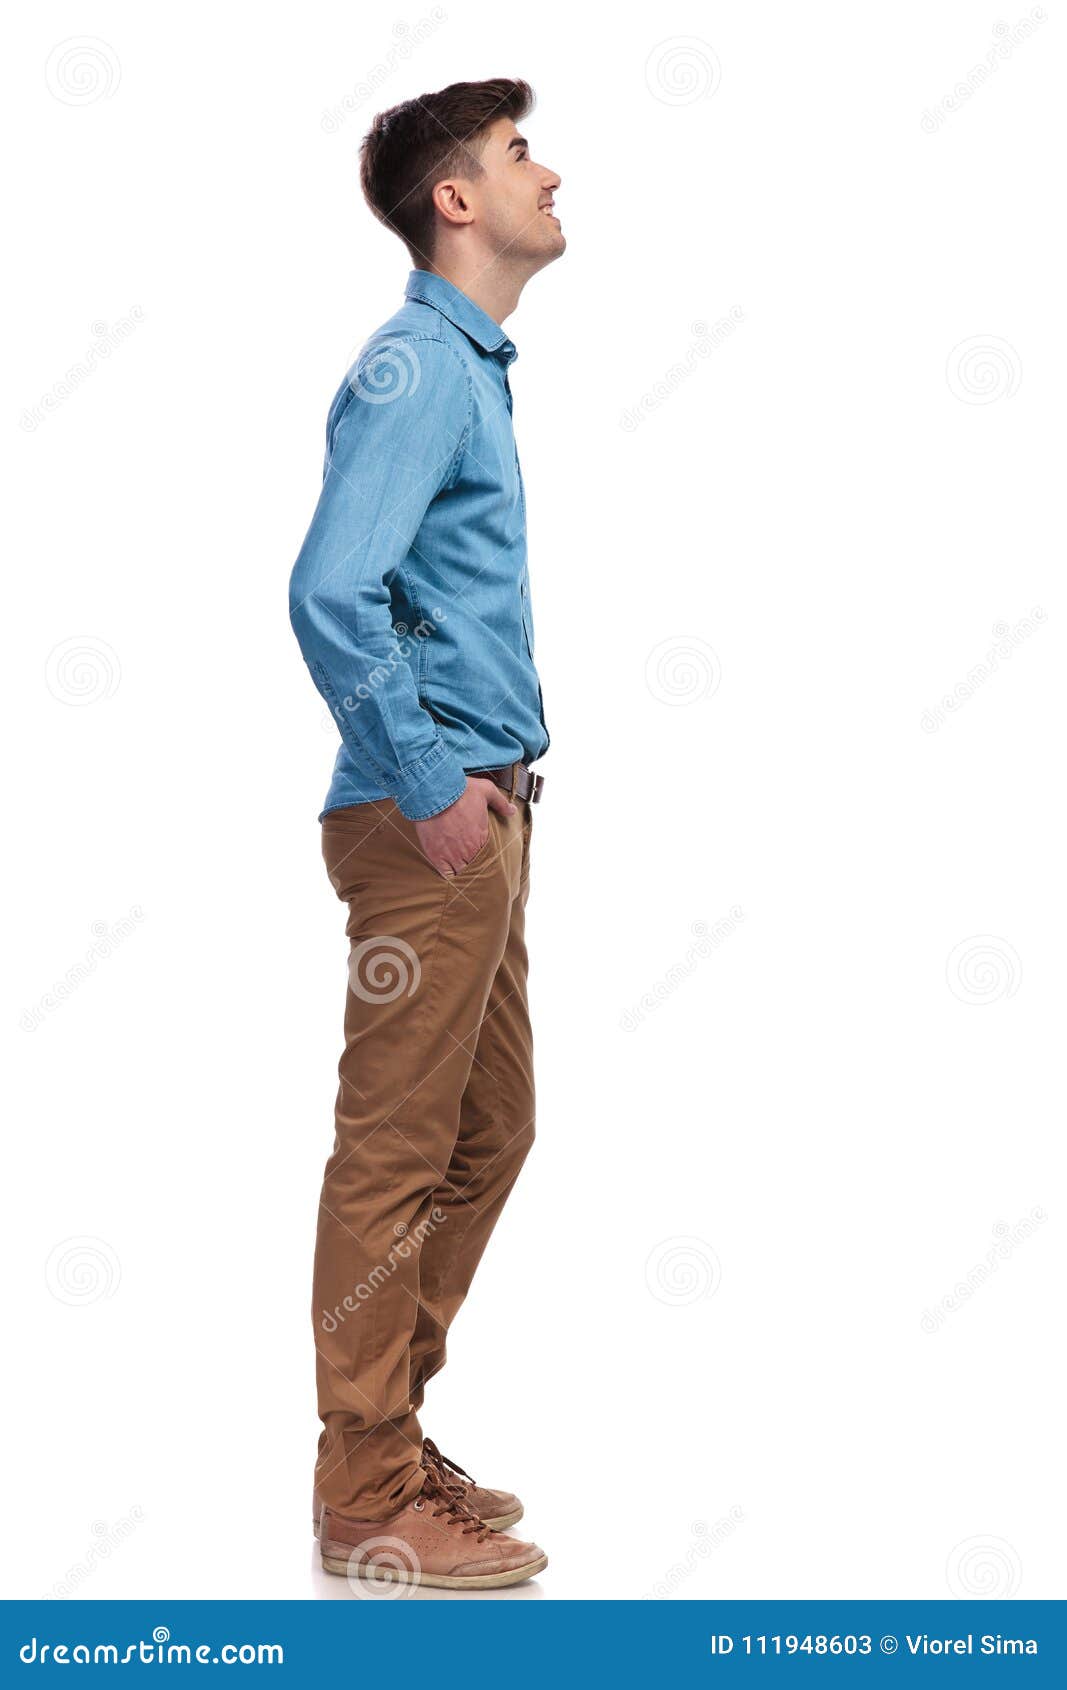 29,503 Man Side View Serious Images, Stock Photos, 3D objects, & Vectors |  Shutterstock